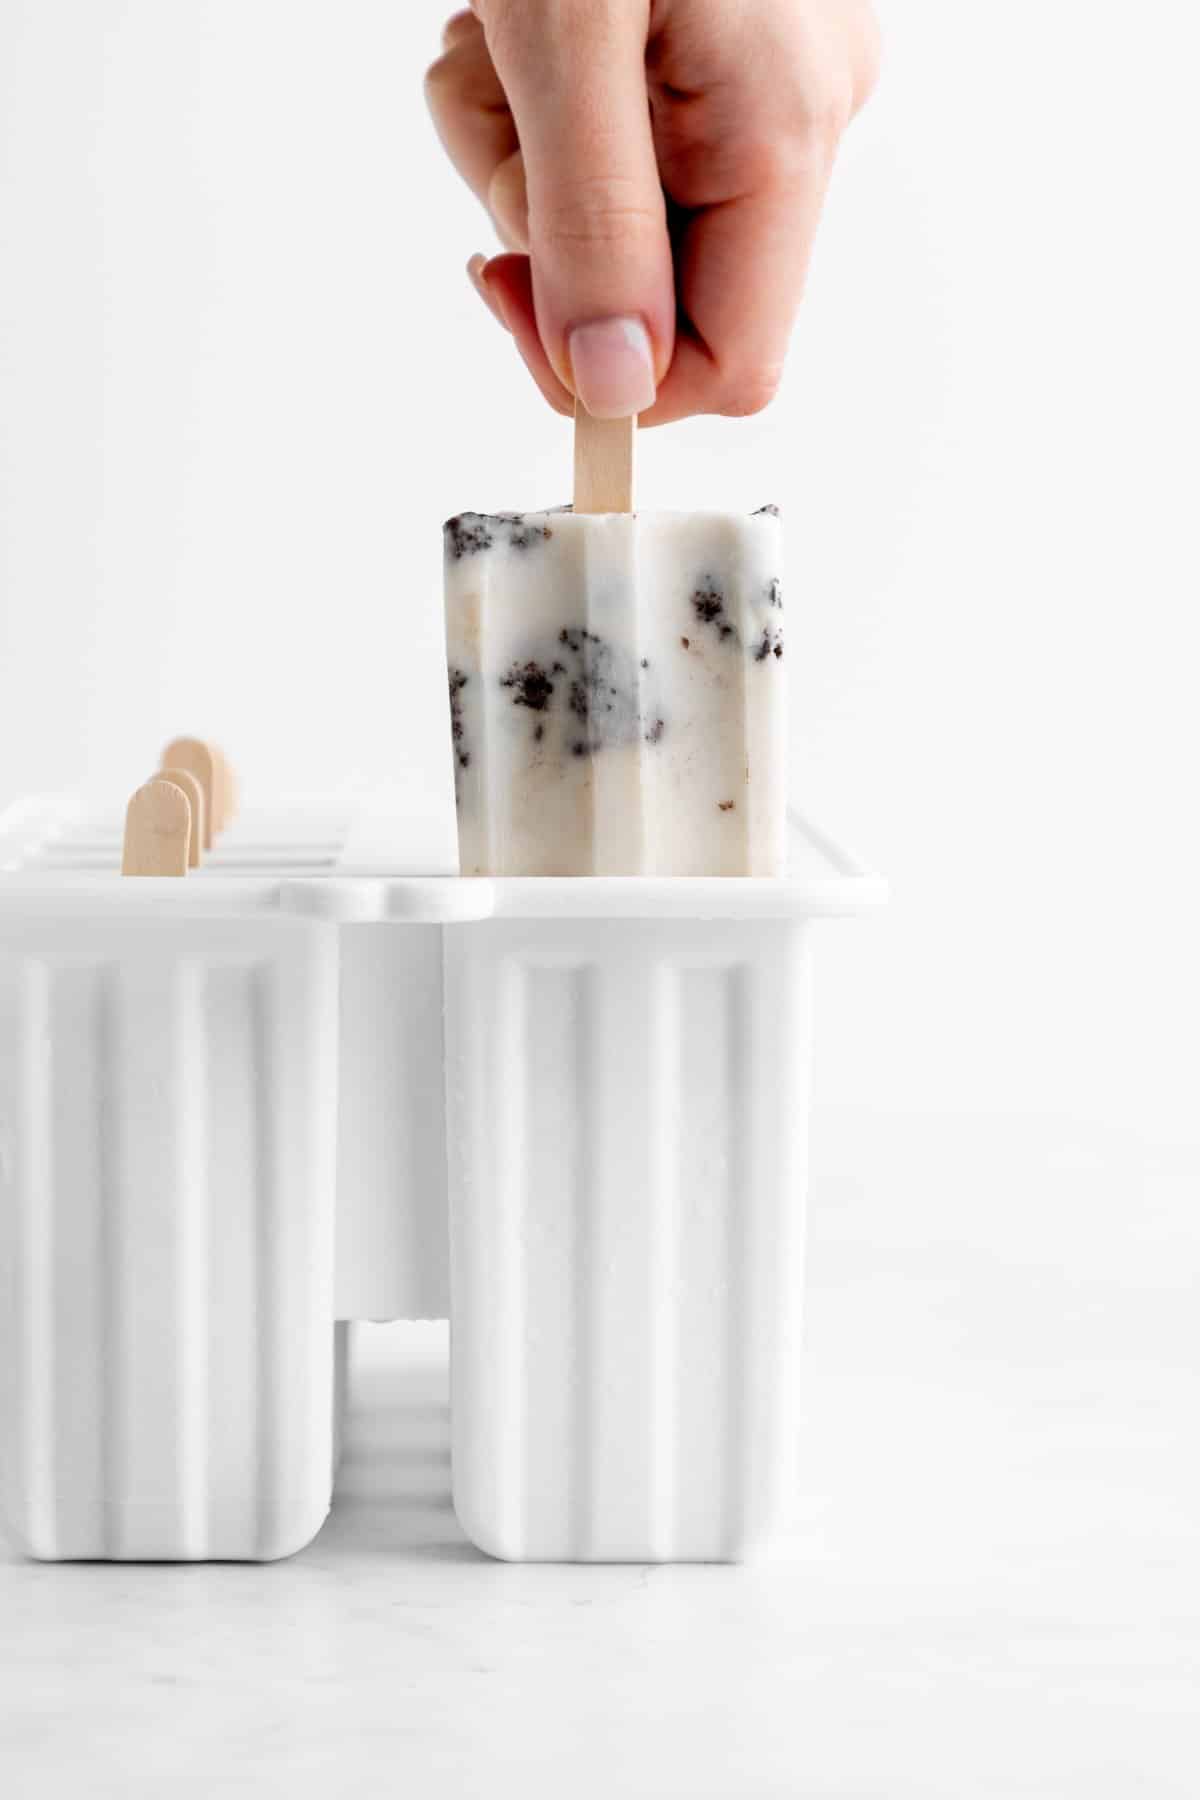 a hand pulling a cookies and cream popsicle out of a white popsicle mold